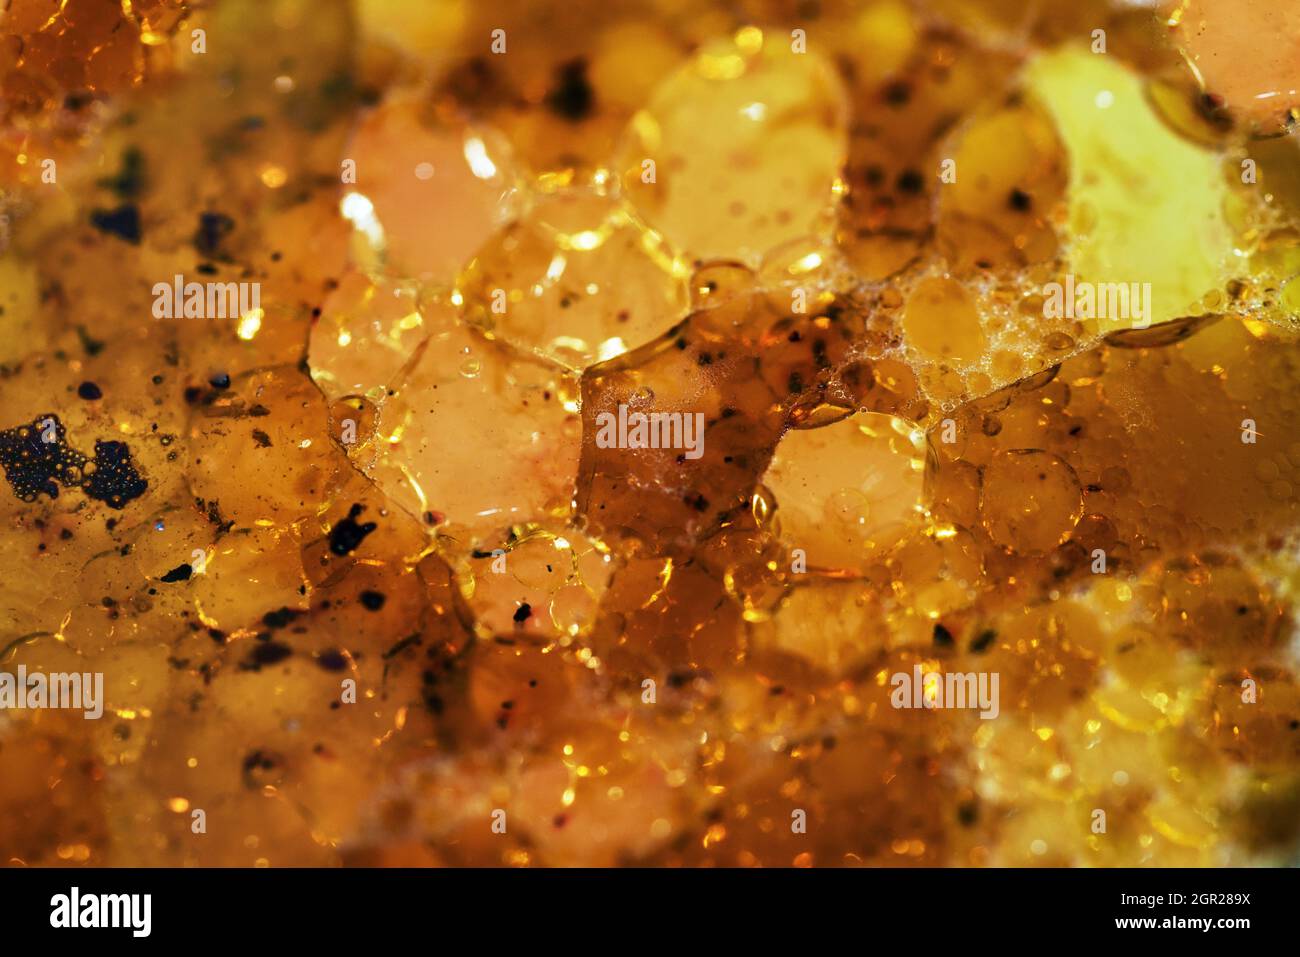 Amber yellow abstract background with honeycomb cells structure Stock ...